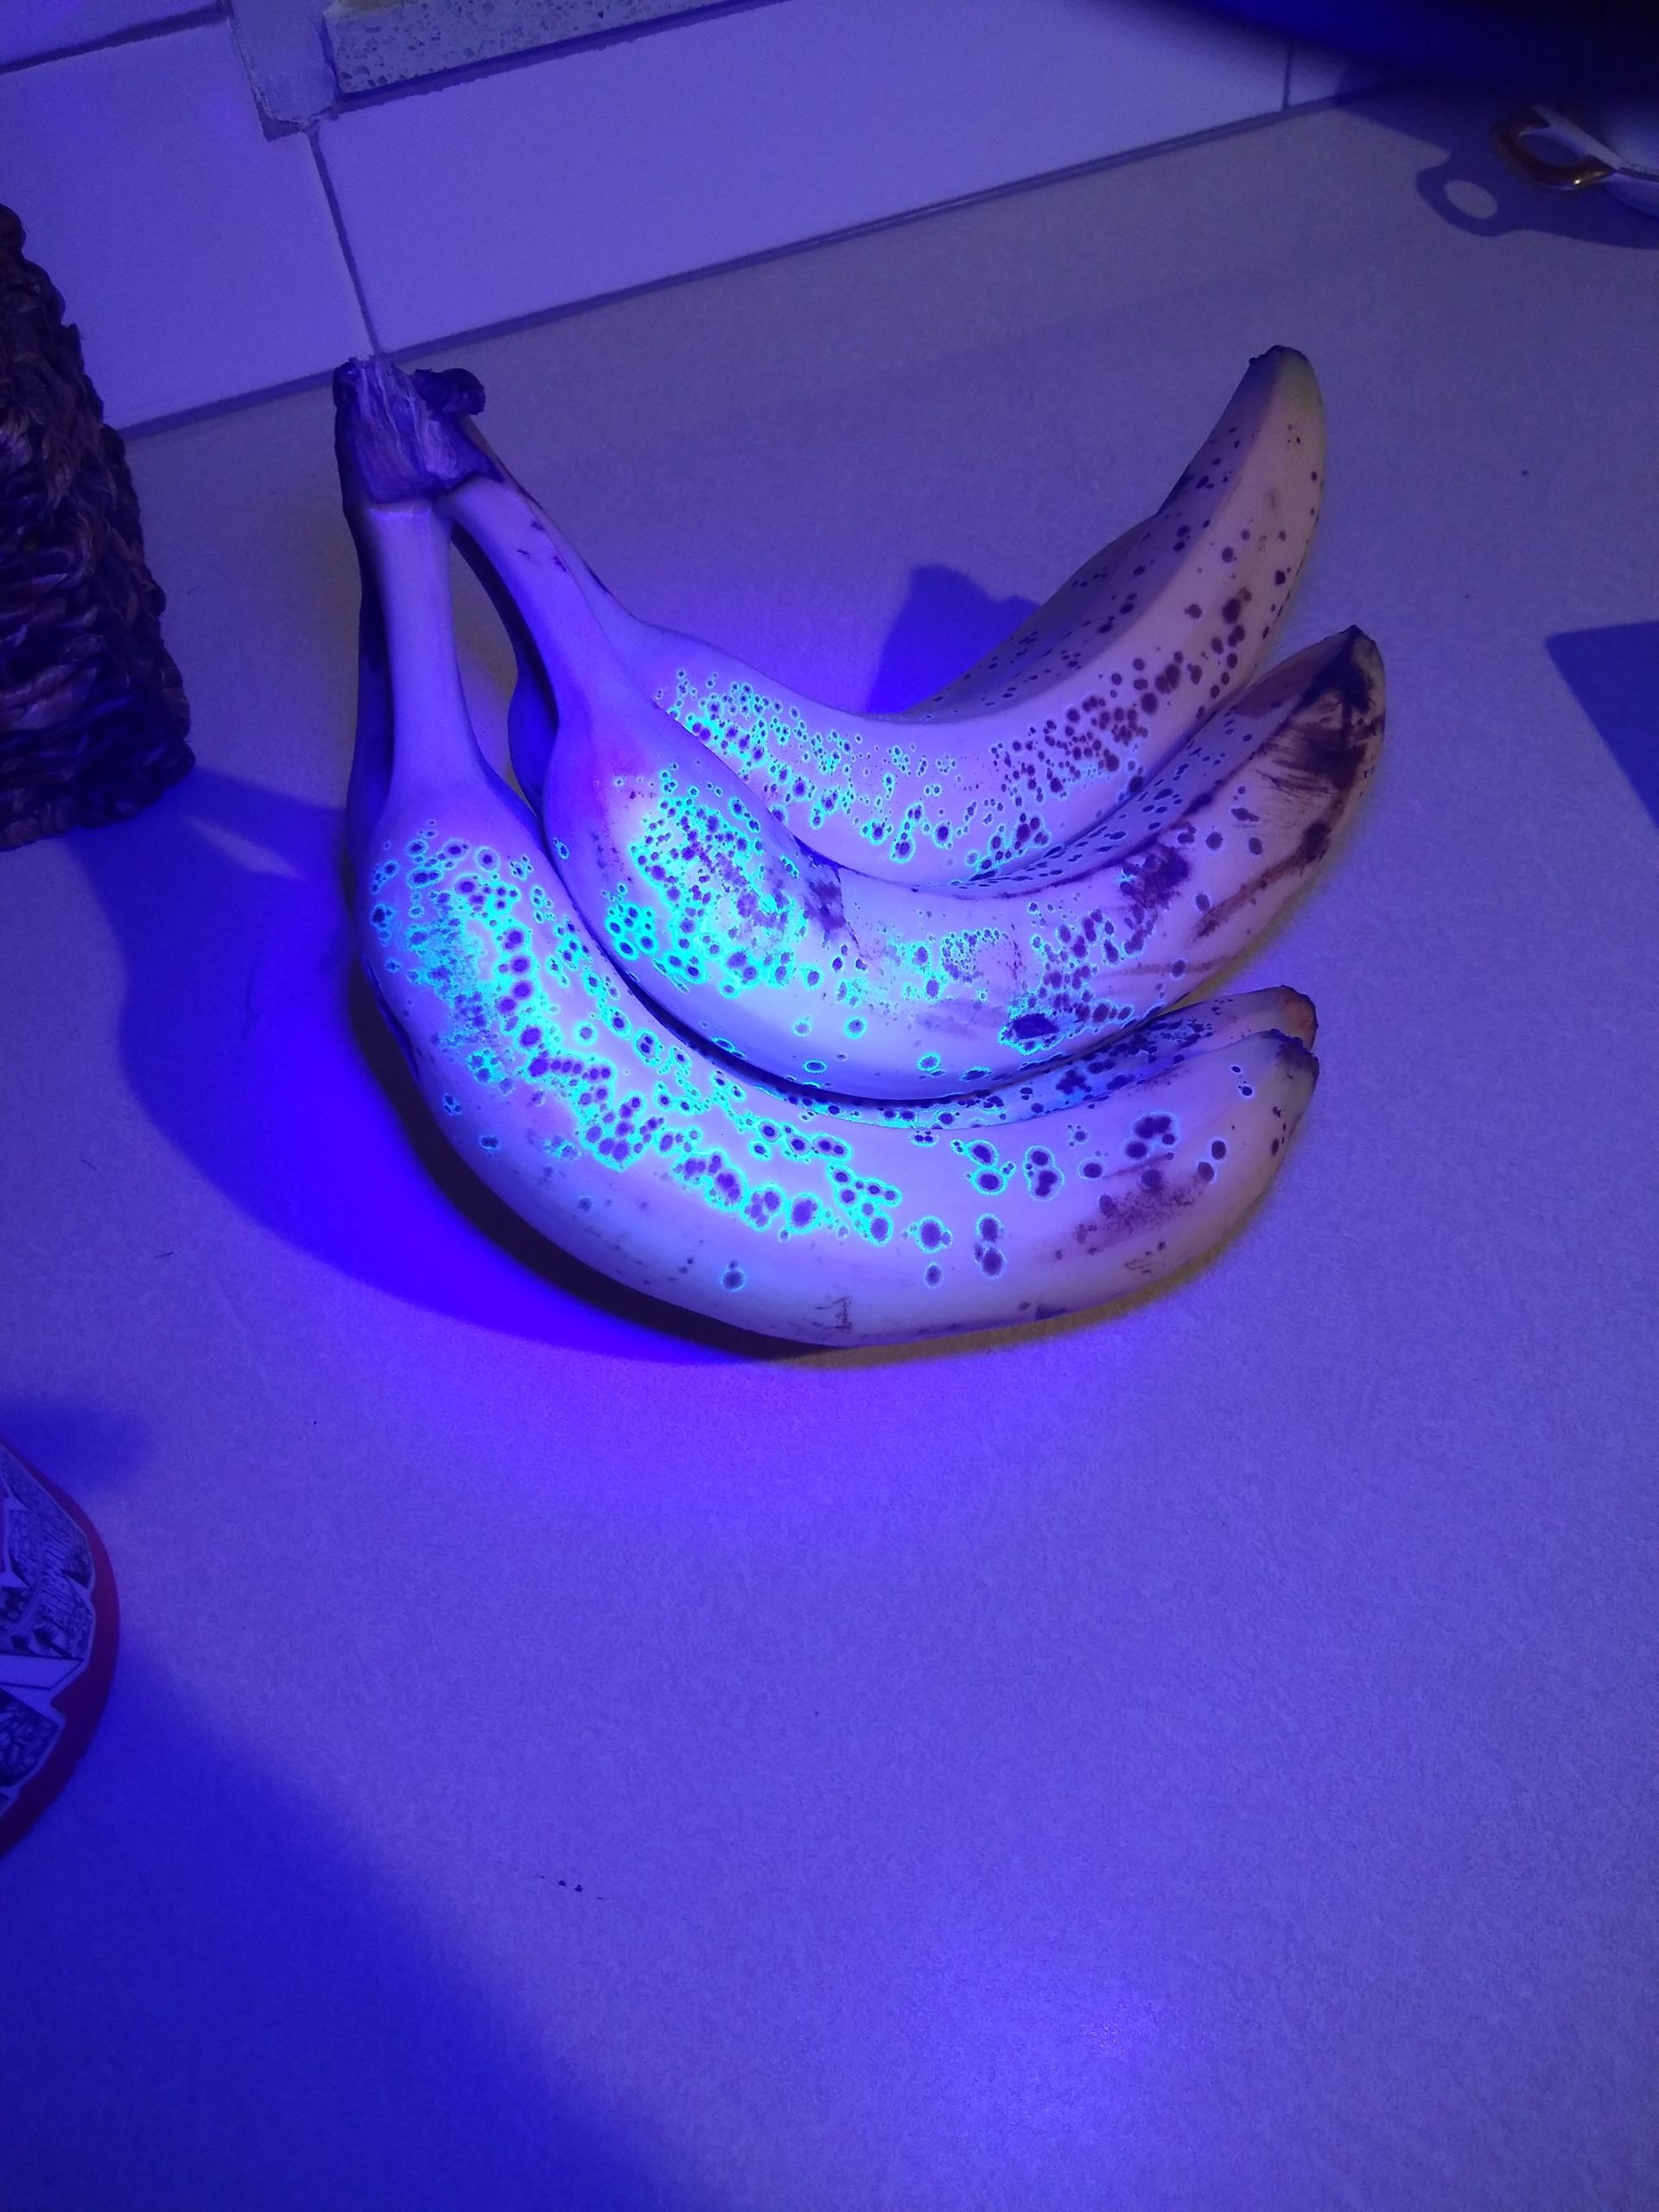 The+areas+around+the+brown+spots+on+bananas+glow+brightly+when+you+shine+a+black+light+on+them%2C+BTW.